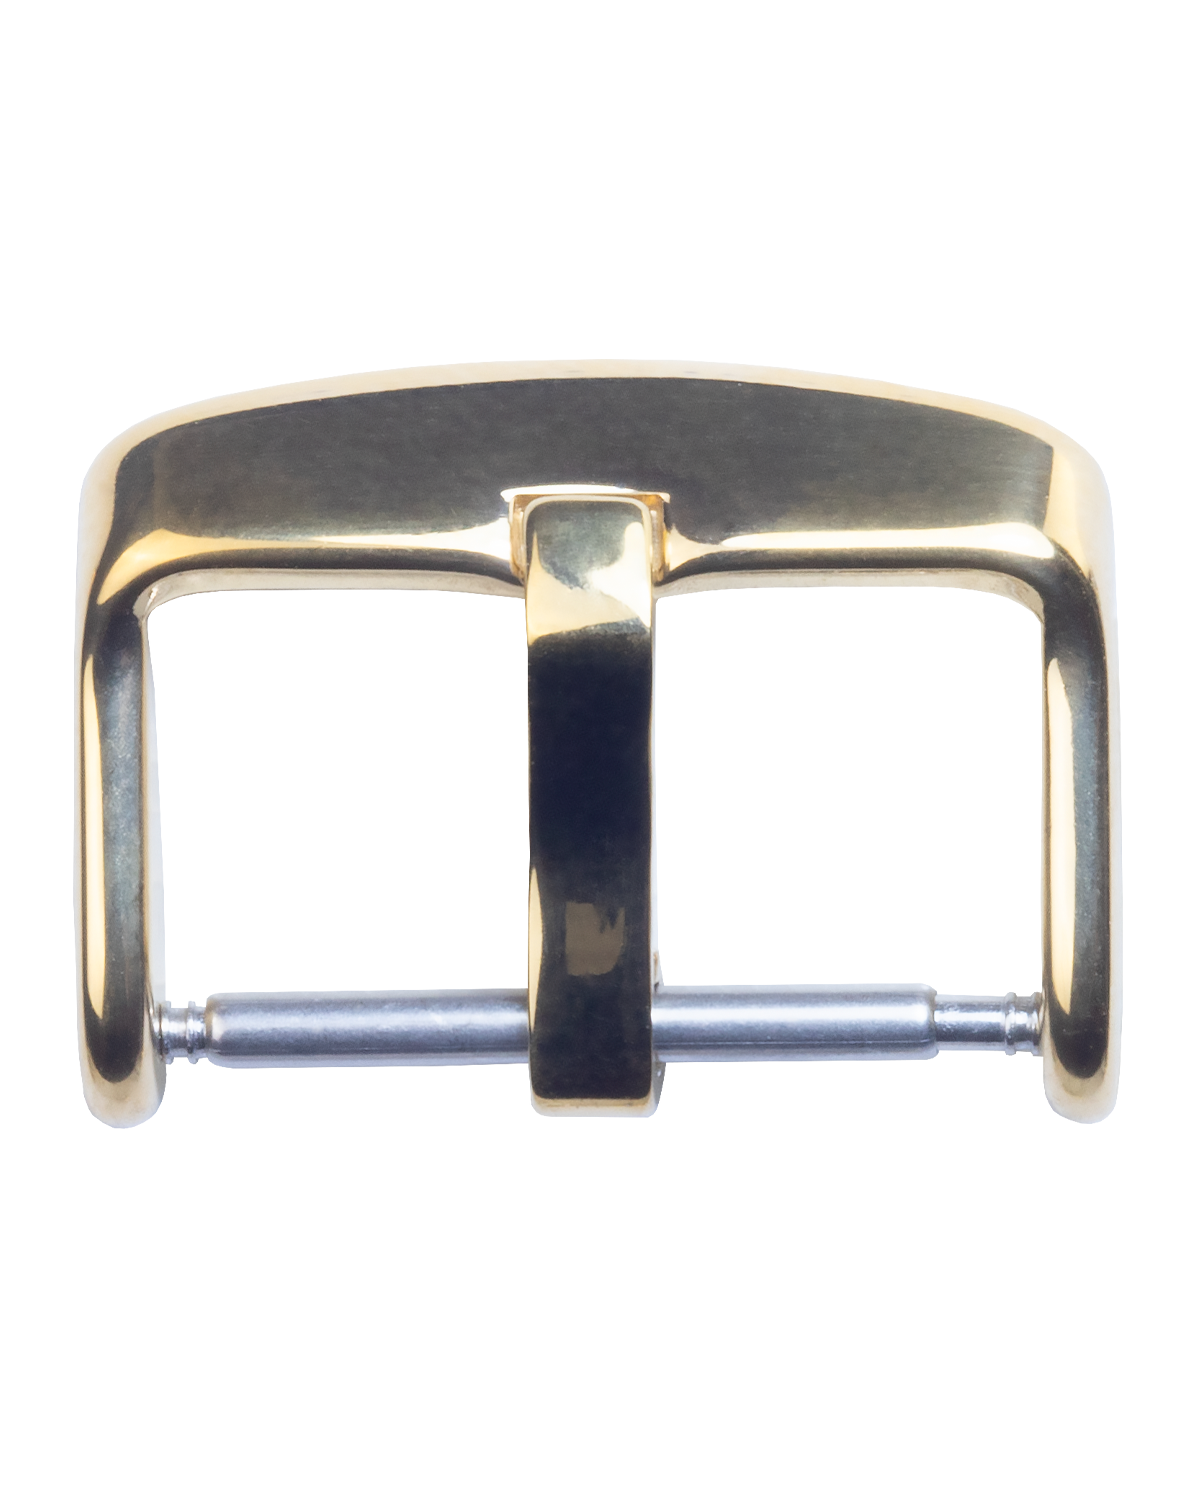 Buckle with wide pin, gold plated